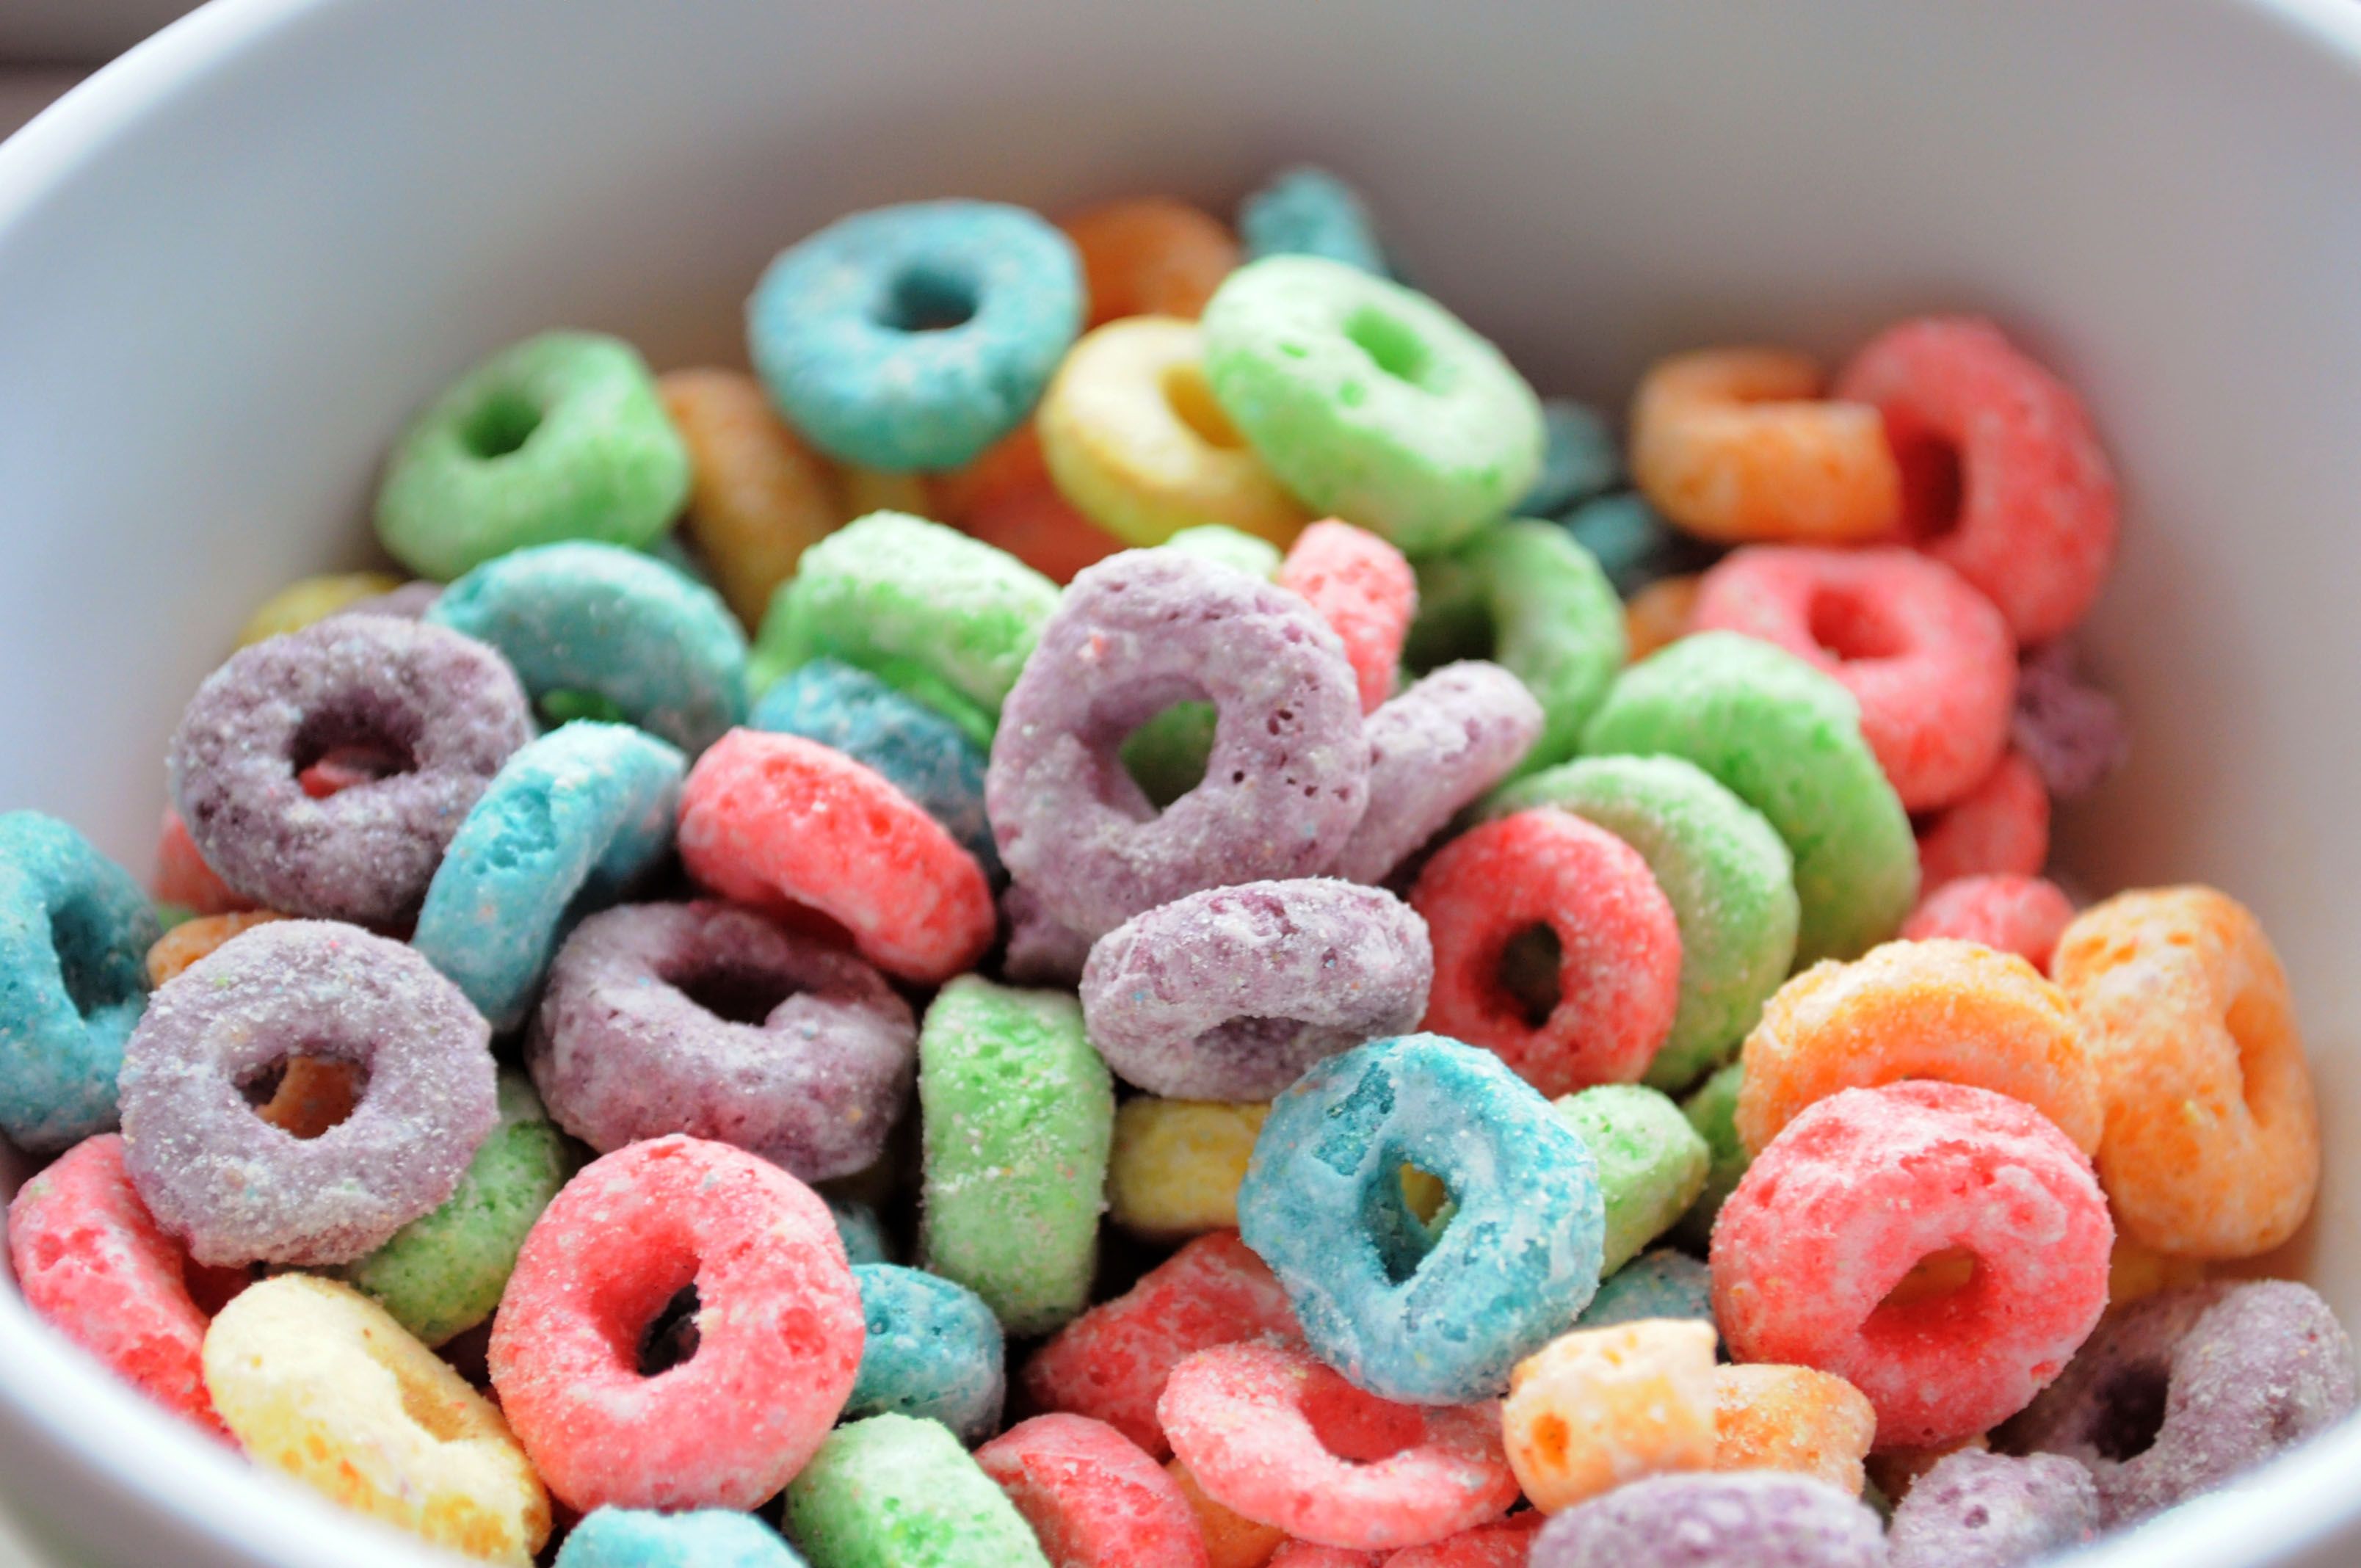 Kellogg's Removing Artificial Flavors and Colors From Its Products 